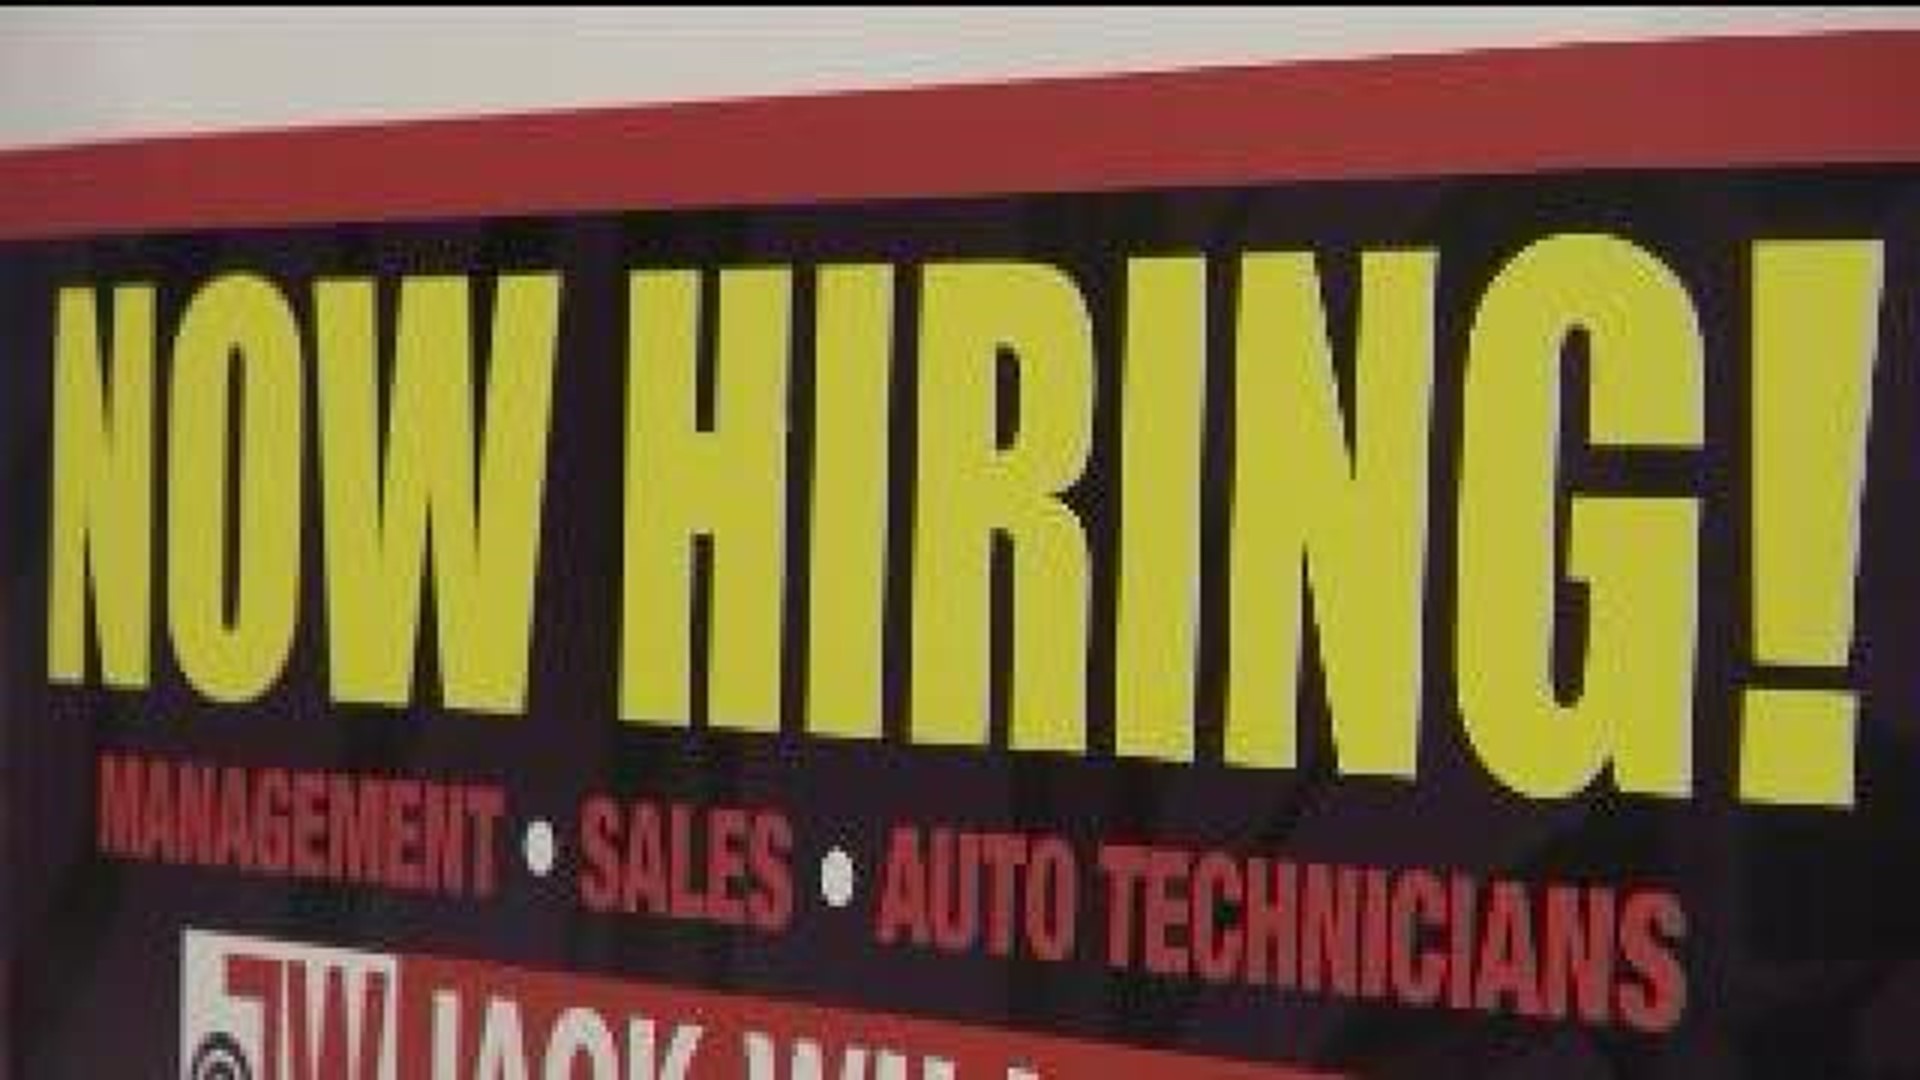 Holding Out Hope for Jobs in Luzerne County